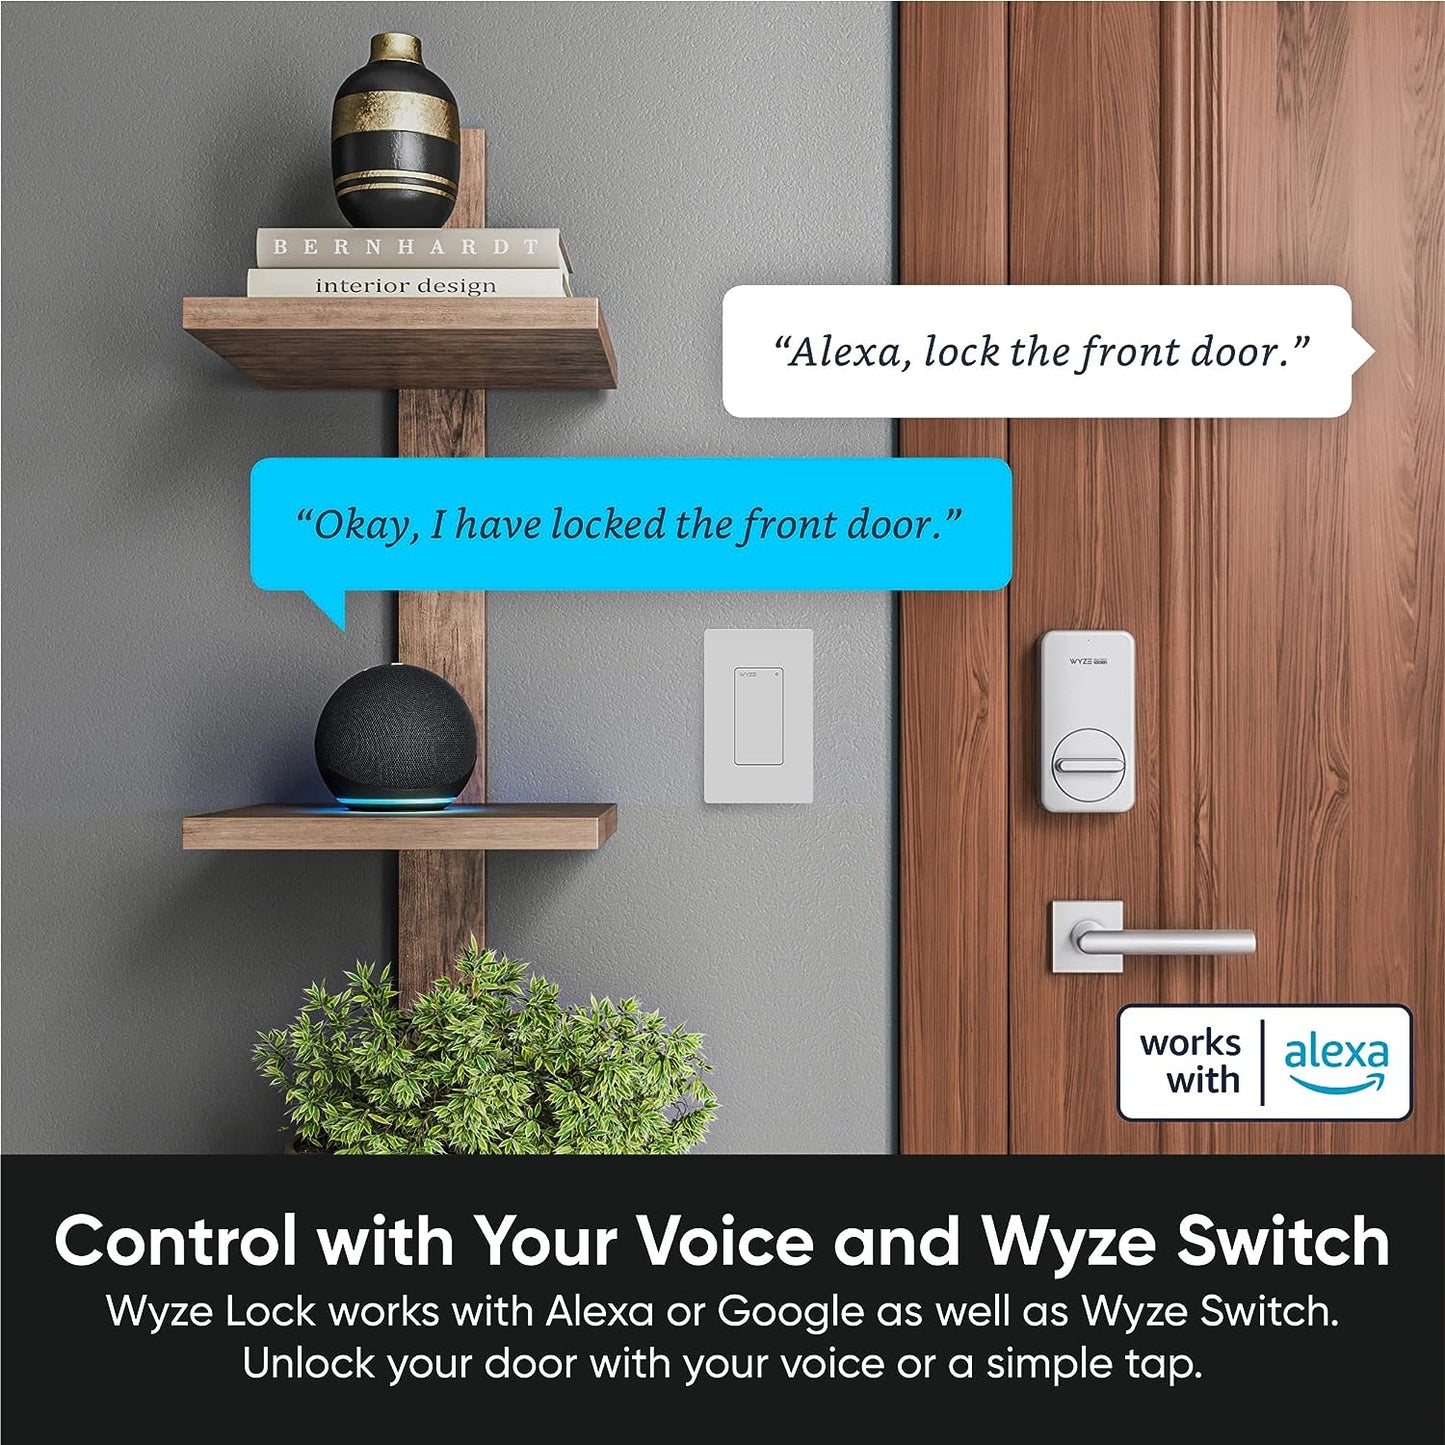 Control with your voice and wyze switch. Wyze smart lock solutions for aging in place | AskSAMIE